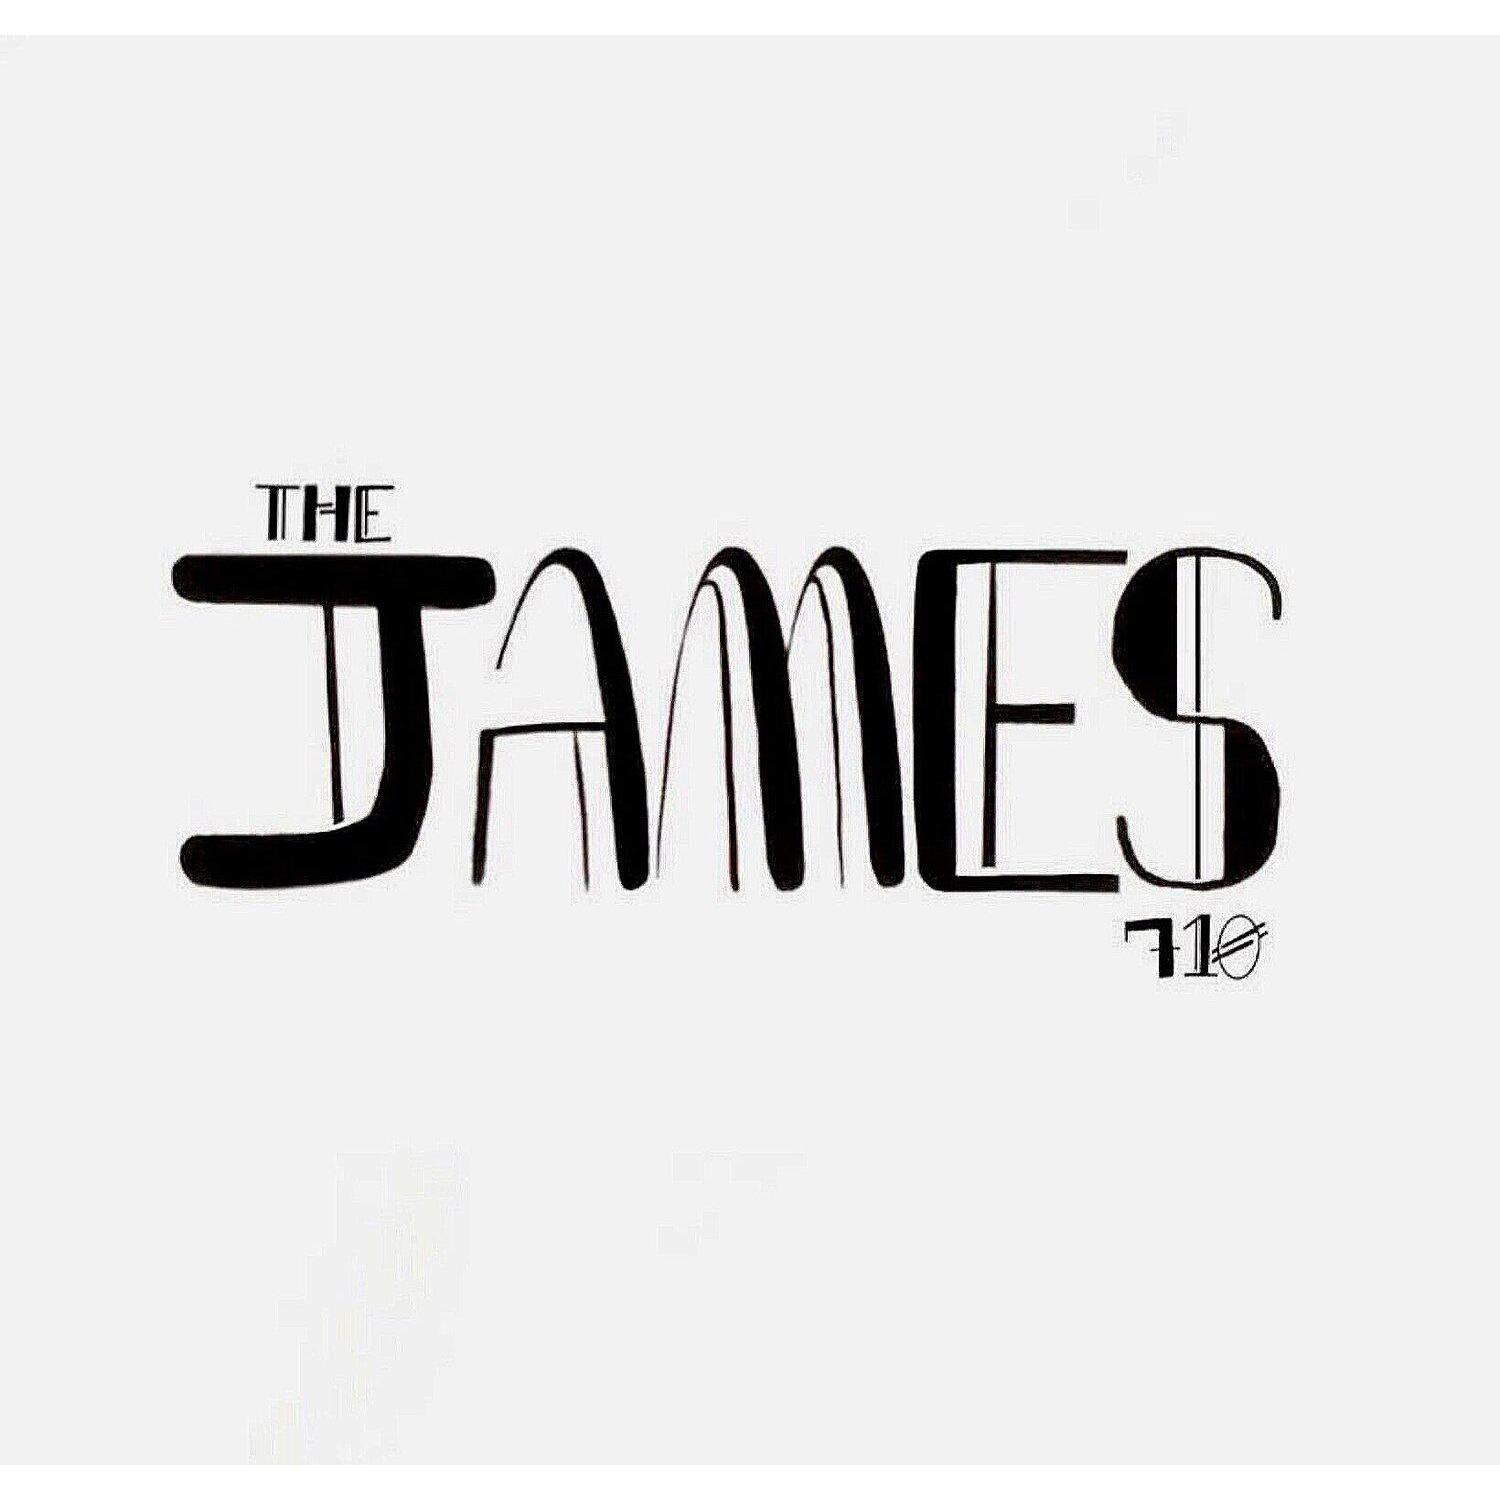 The James 710